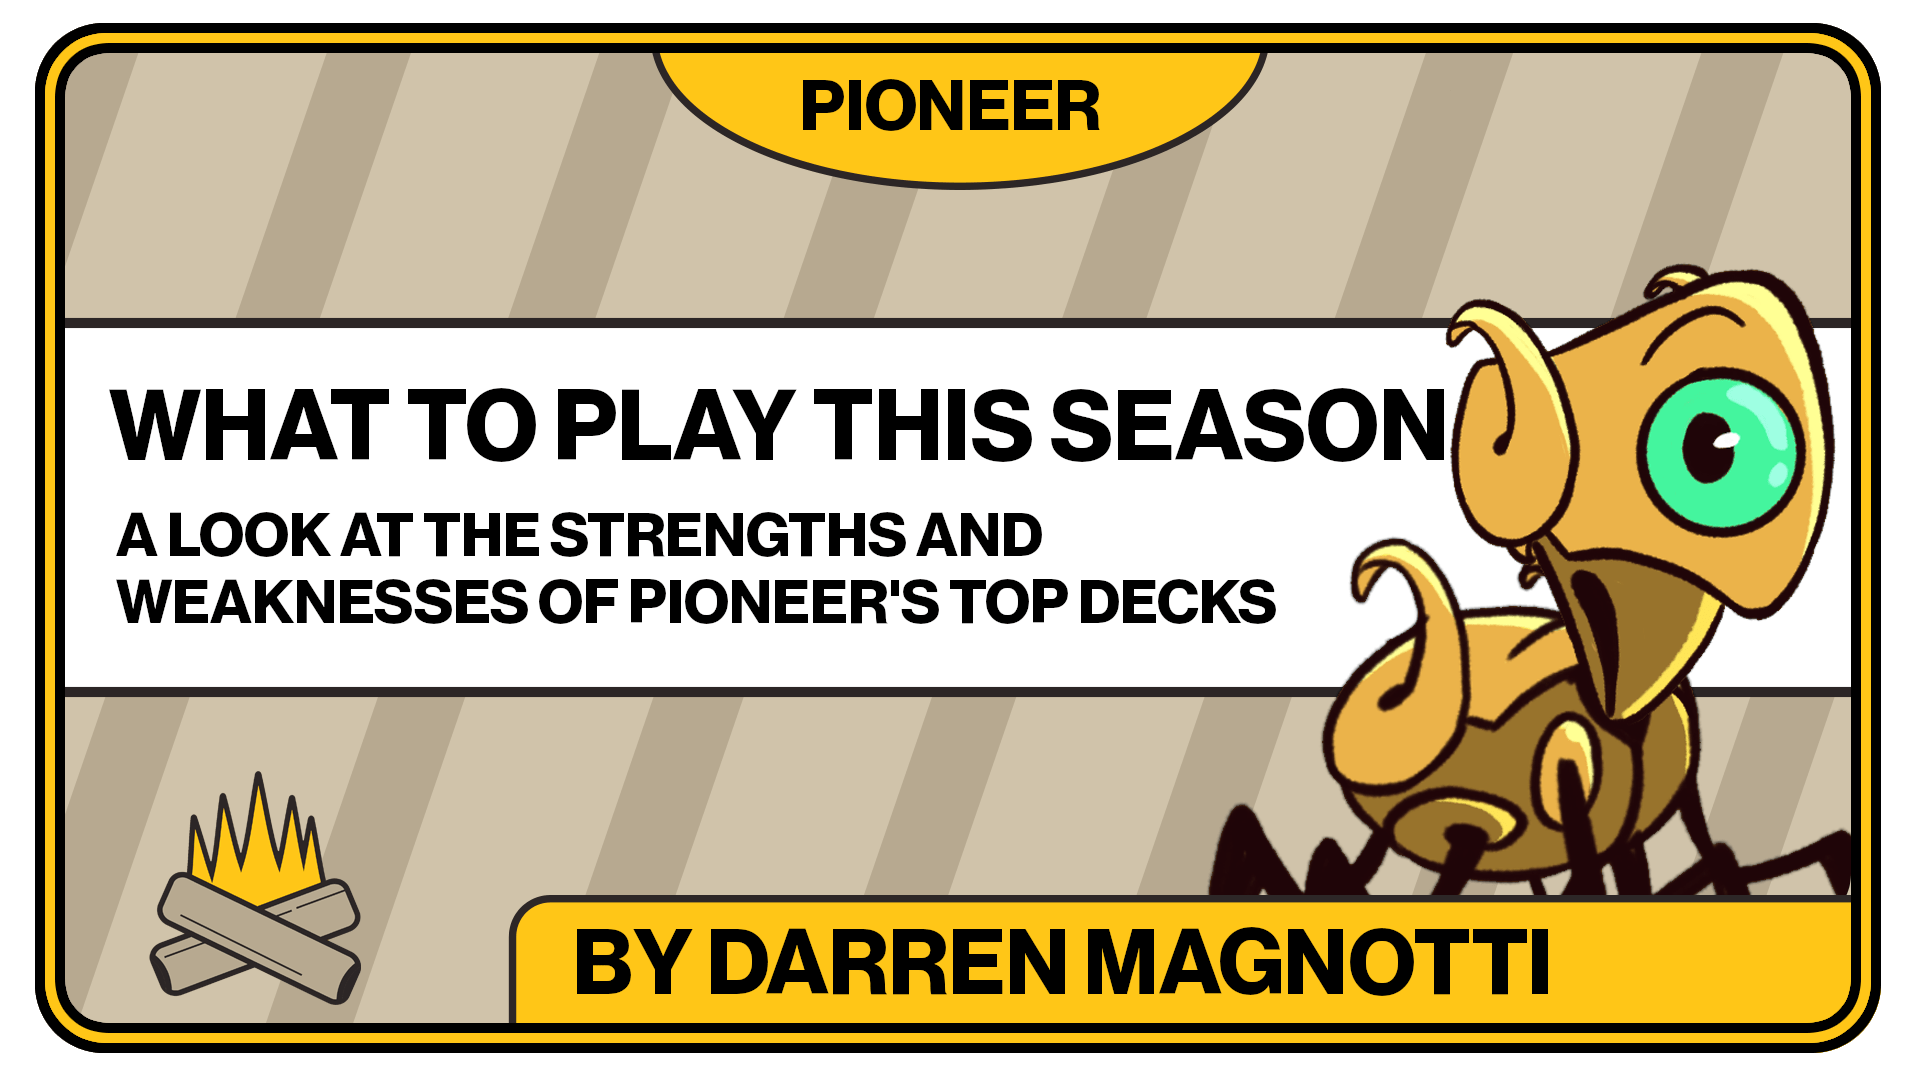 What to play for the Upcoming Pioneer RCQ Season